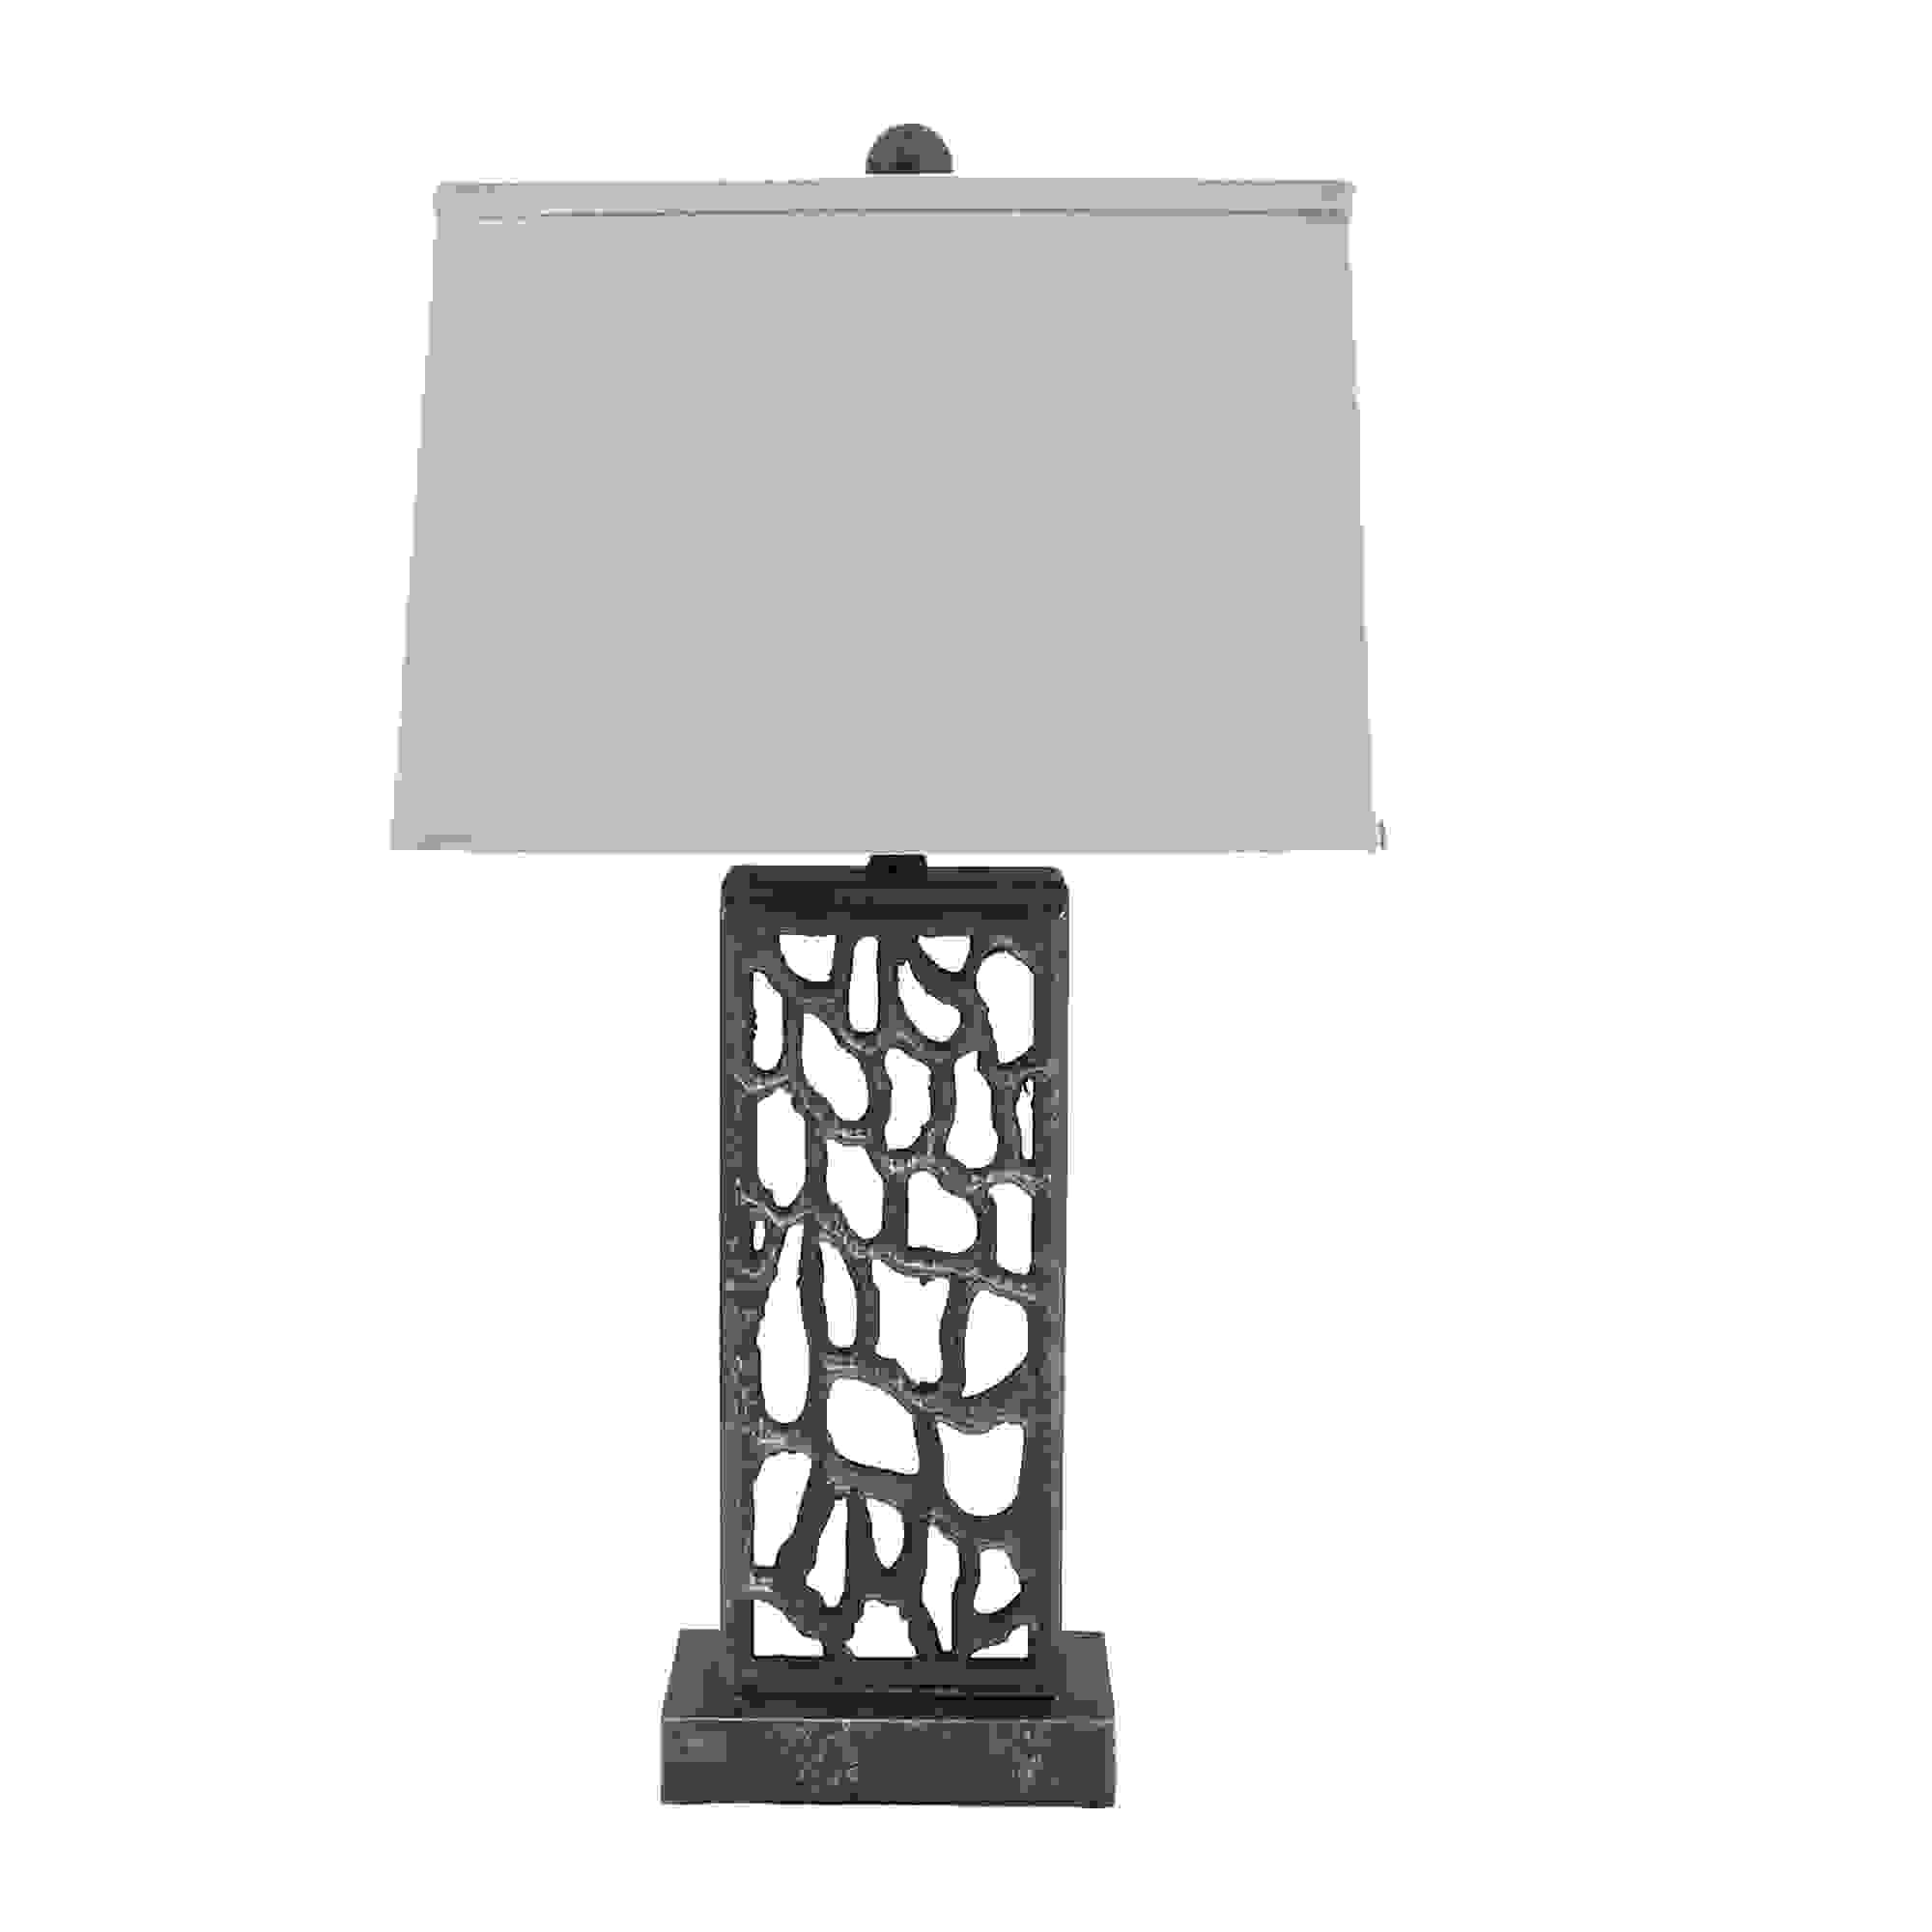 5" x 8" x 28.75" Silver, Metal With Multi Mini Grotto Pattern - Table Lamp